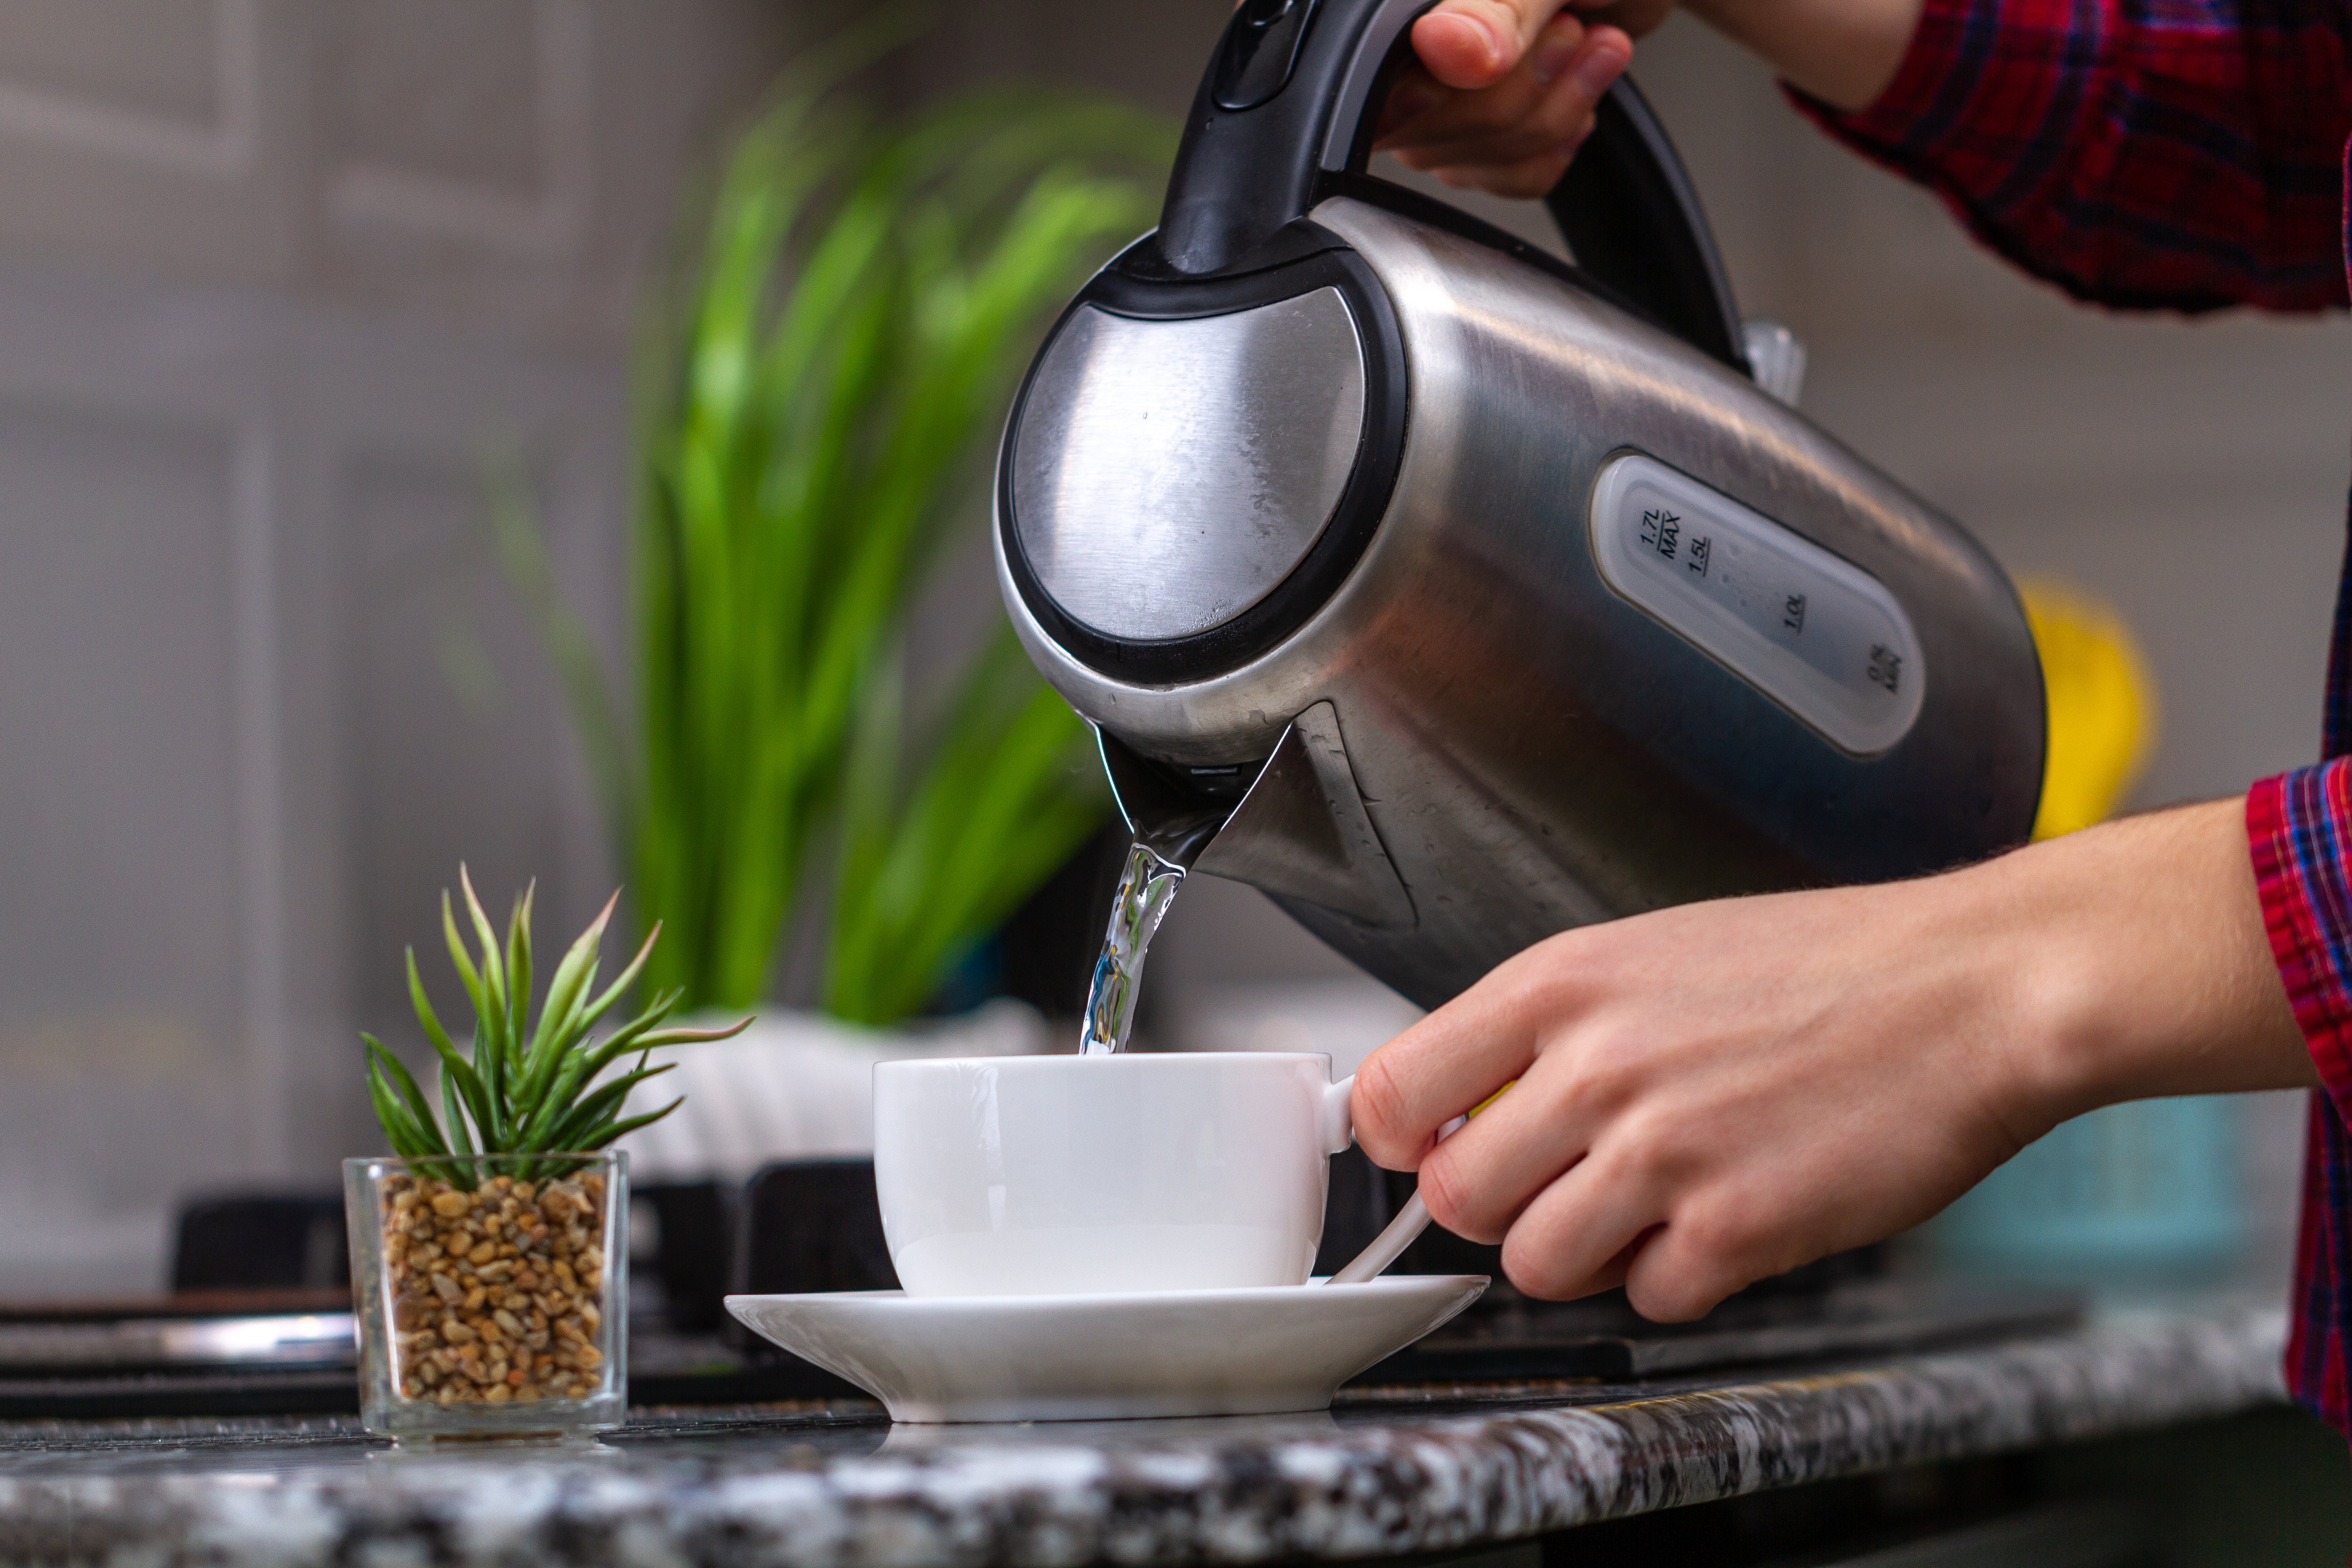 Electric Kettle Vs. Stovetop Kettle - Which One You Should Buy